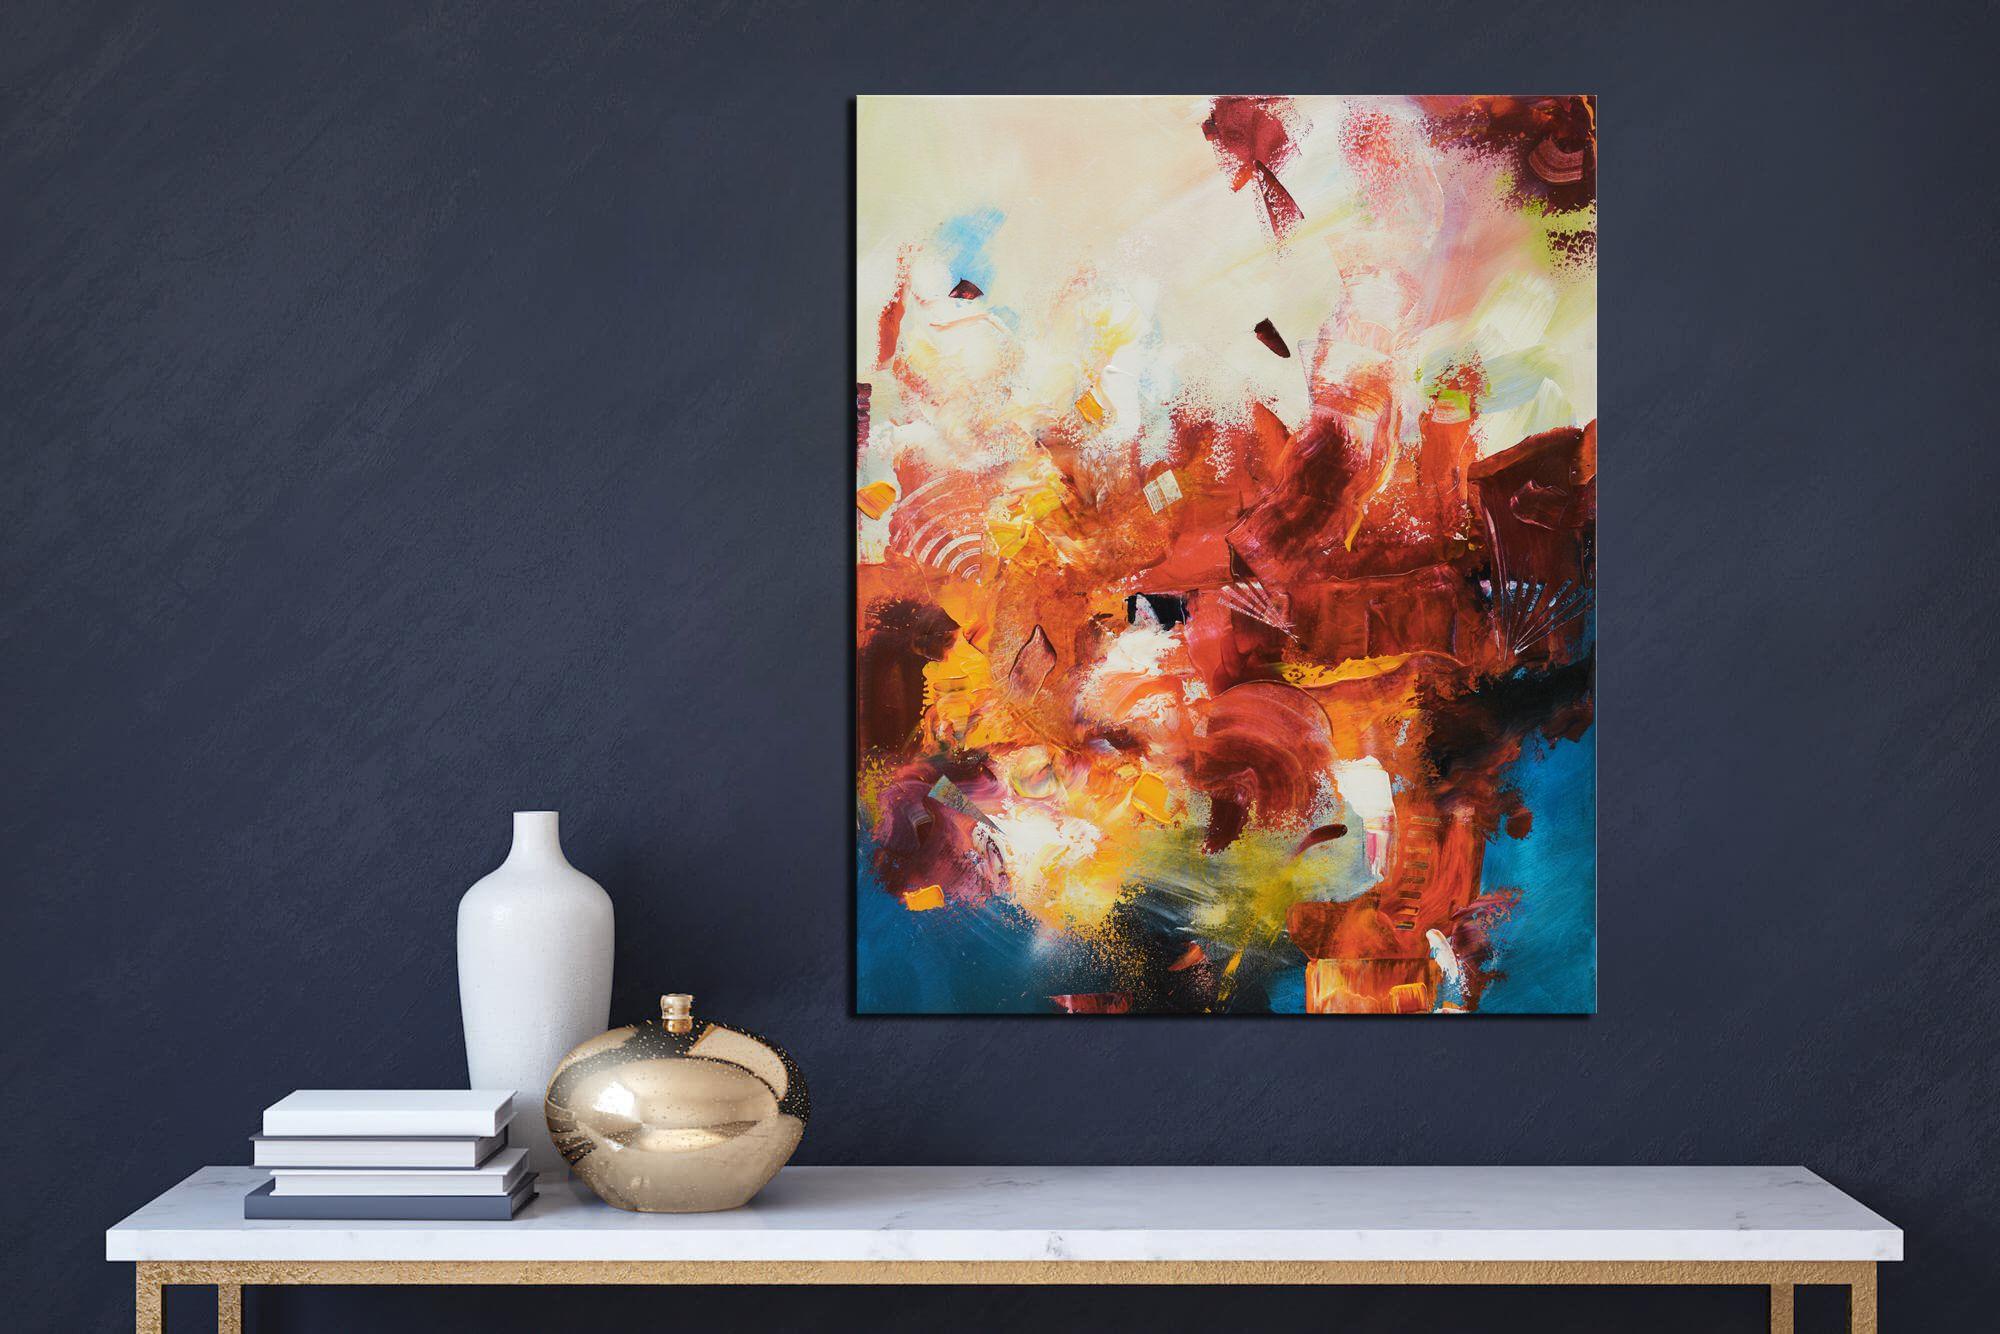 Original painting on canvas, bold red and blue abstract painting, Blue orange, modern wall art, Canadian artist, modern art    Original bold painting on canvas by internationally collected artist, Andrada Anghel.    - Title: Red summer  - Medium: